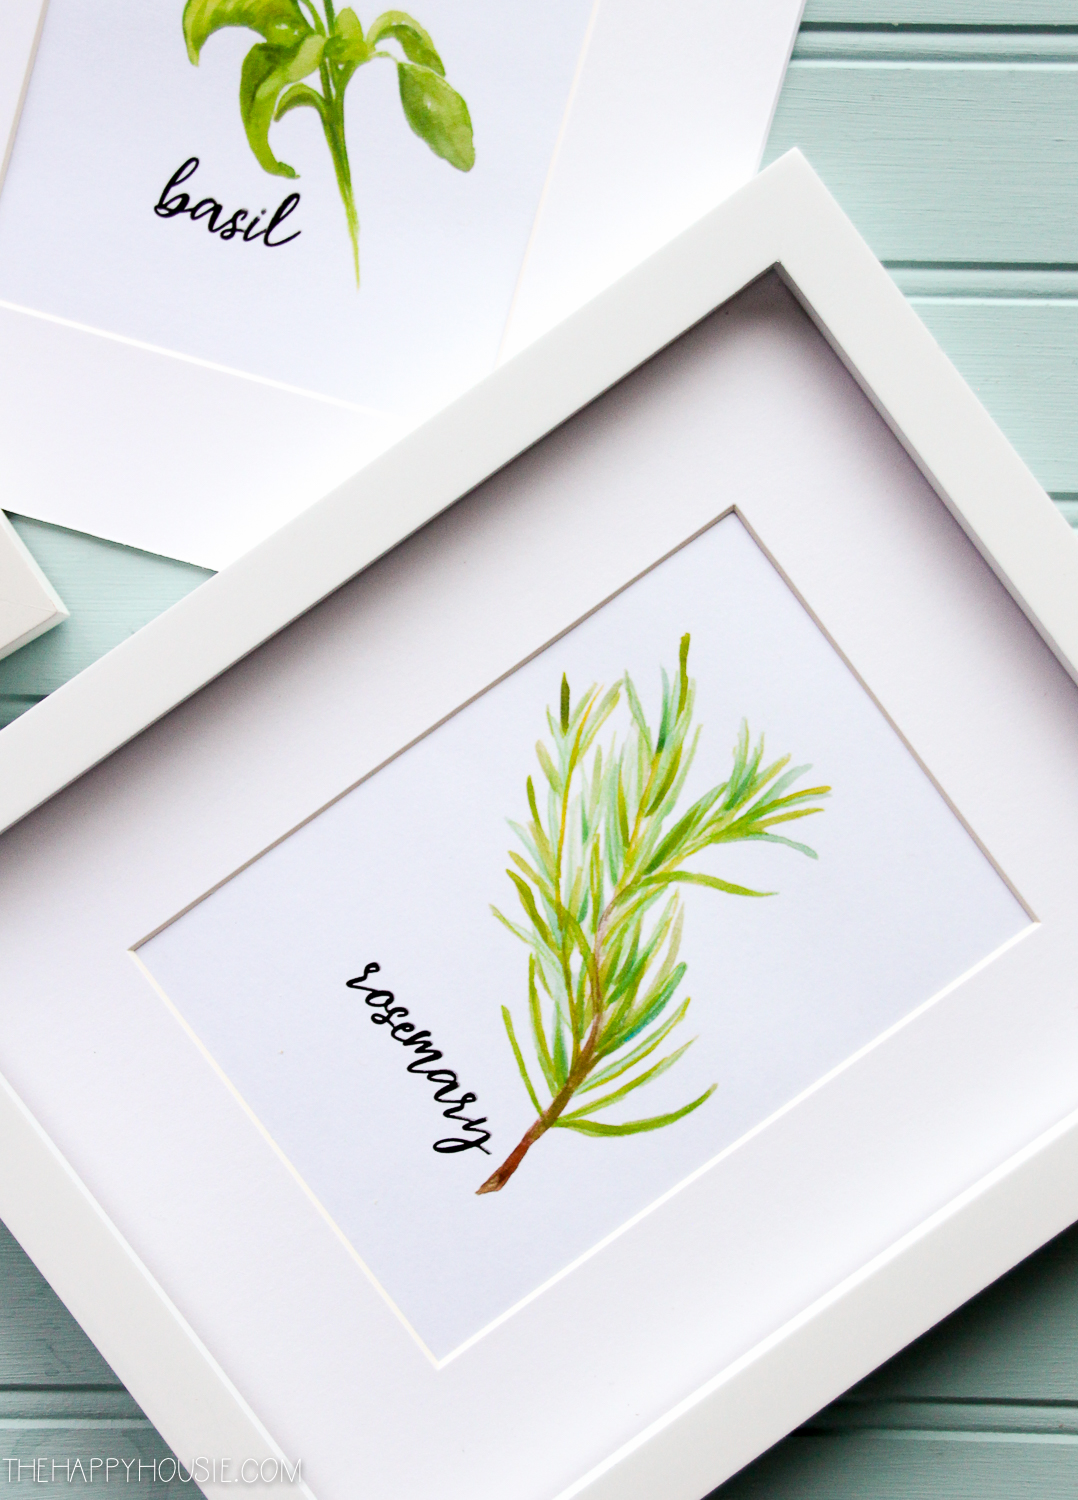 Up close picture of the rosemary printable.